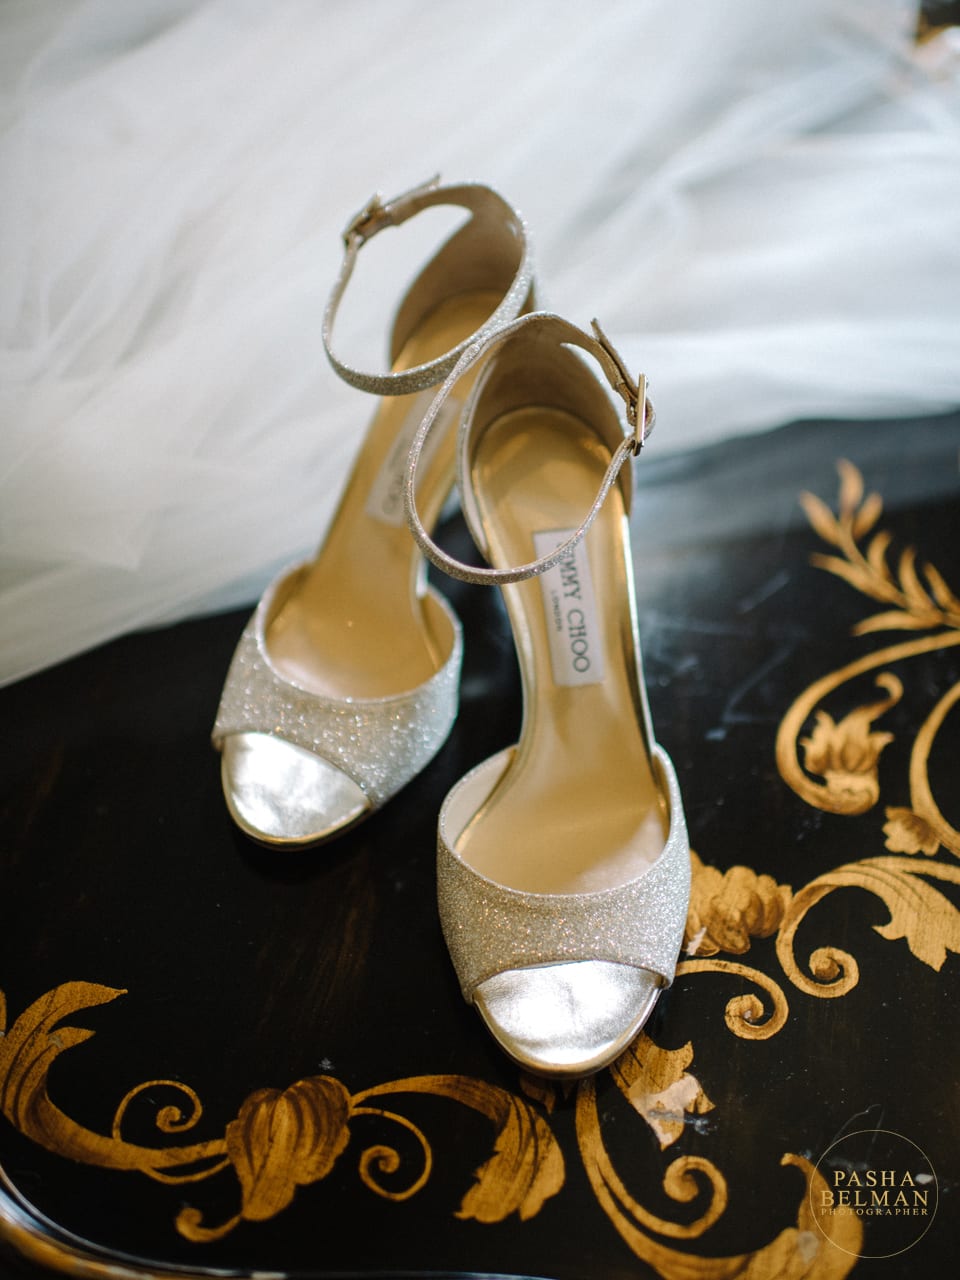 Gorgeous Jimmy Choo Wedding Shoes at a recent wedding at Charlotte Country Club in NC